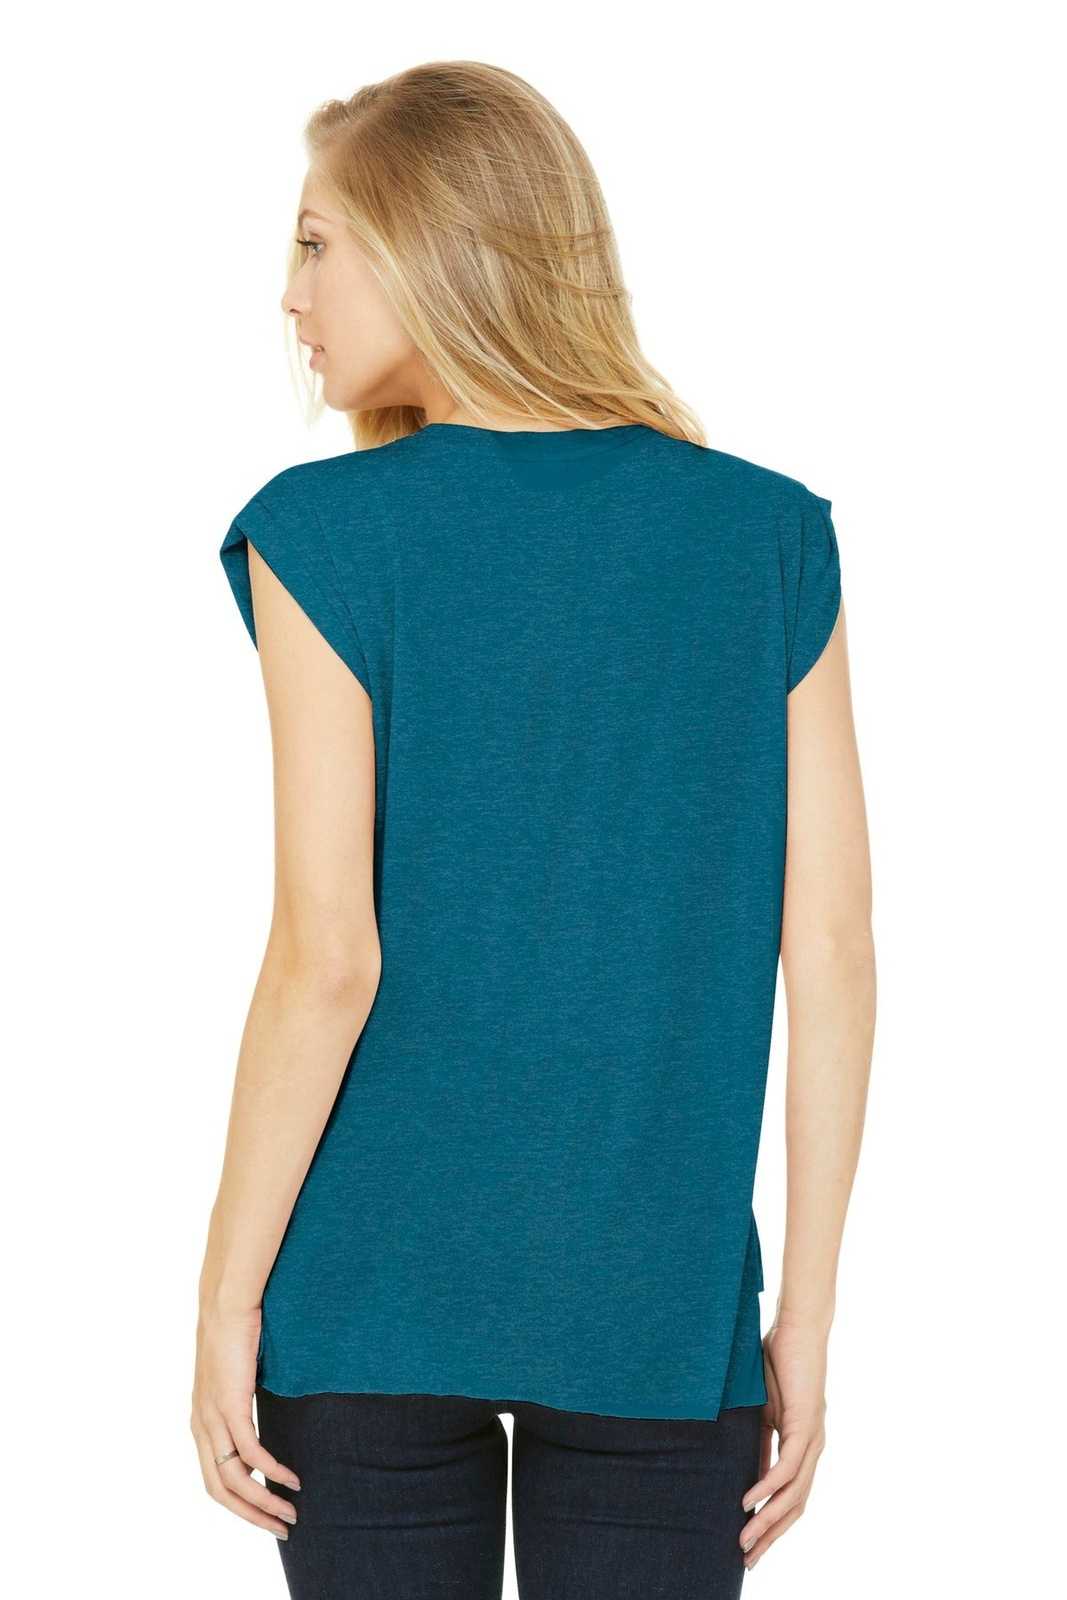 Bella + Canvas 8804 Women's Flowy Muscle Tee with Rolled Cuffs - Heather Deep Teal - HIT a Double